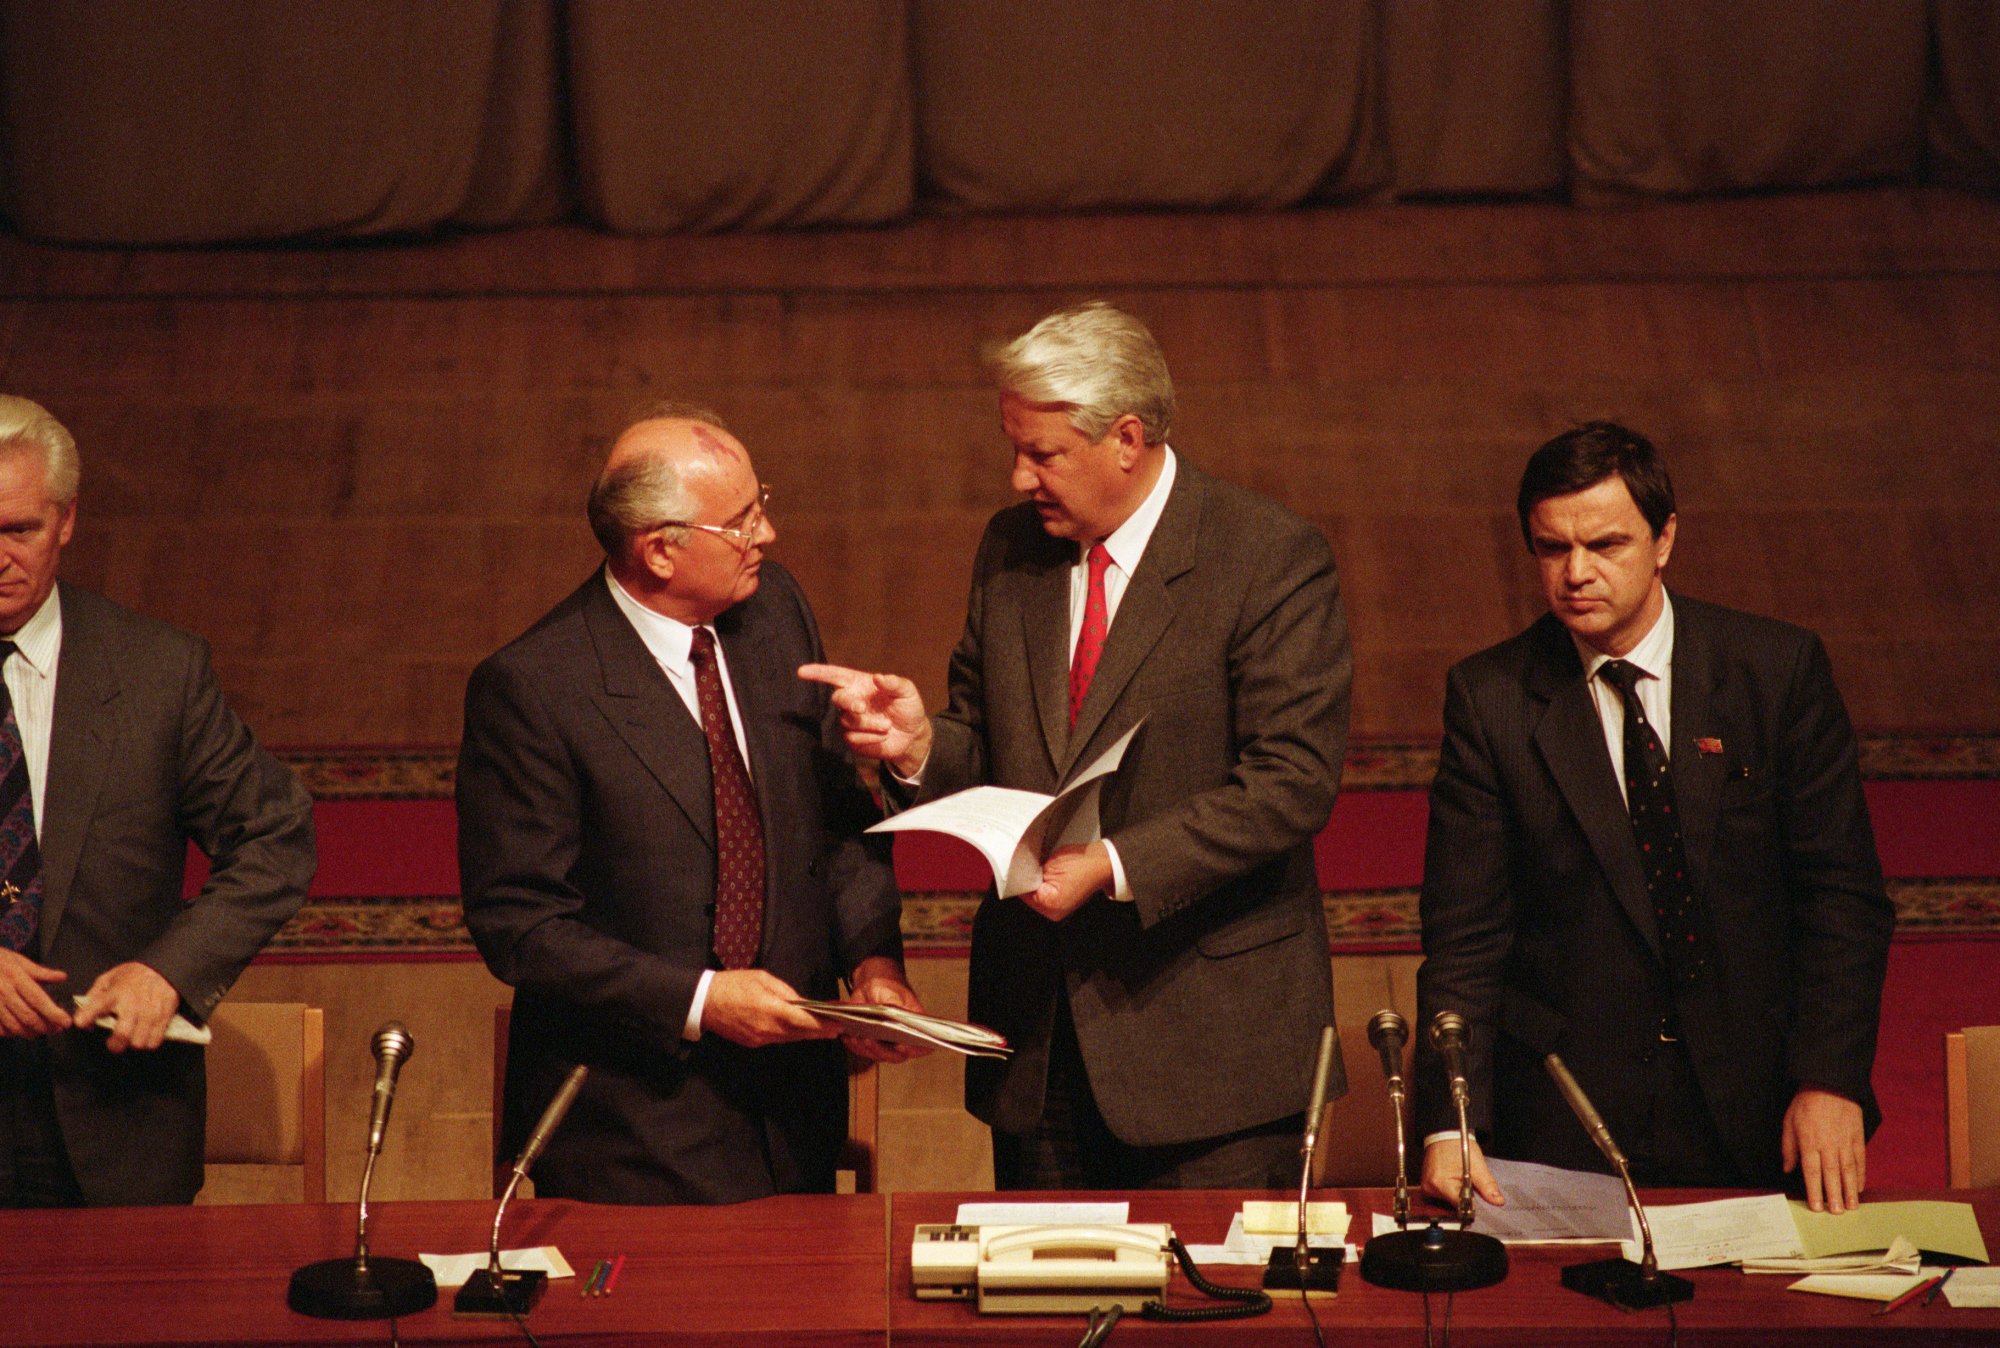 Gorbachev gets a lecture from Yeltsin